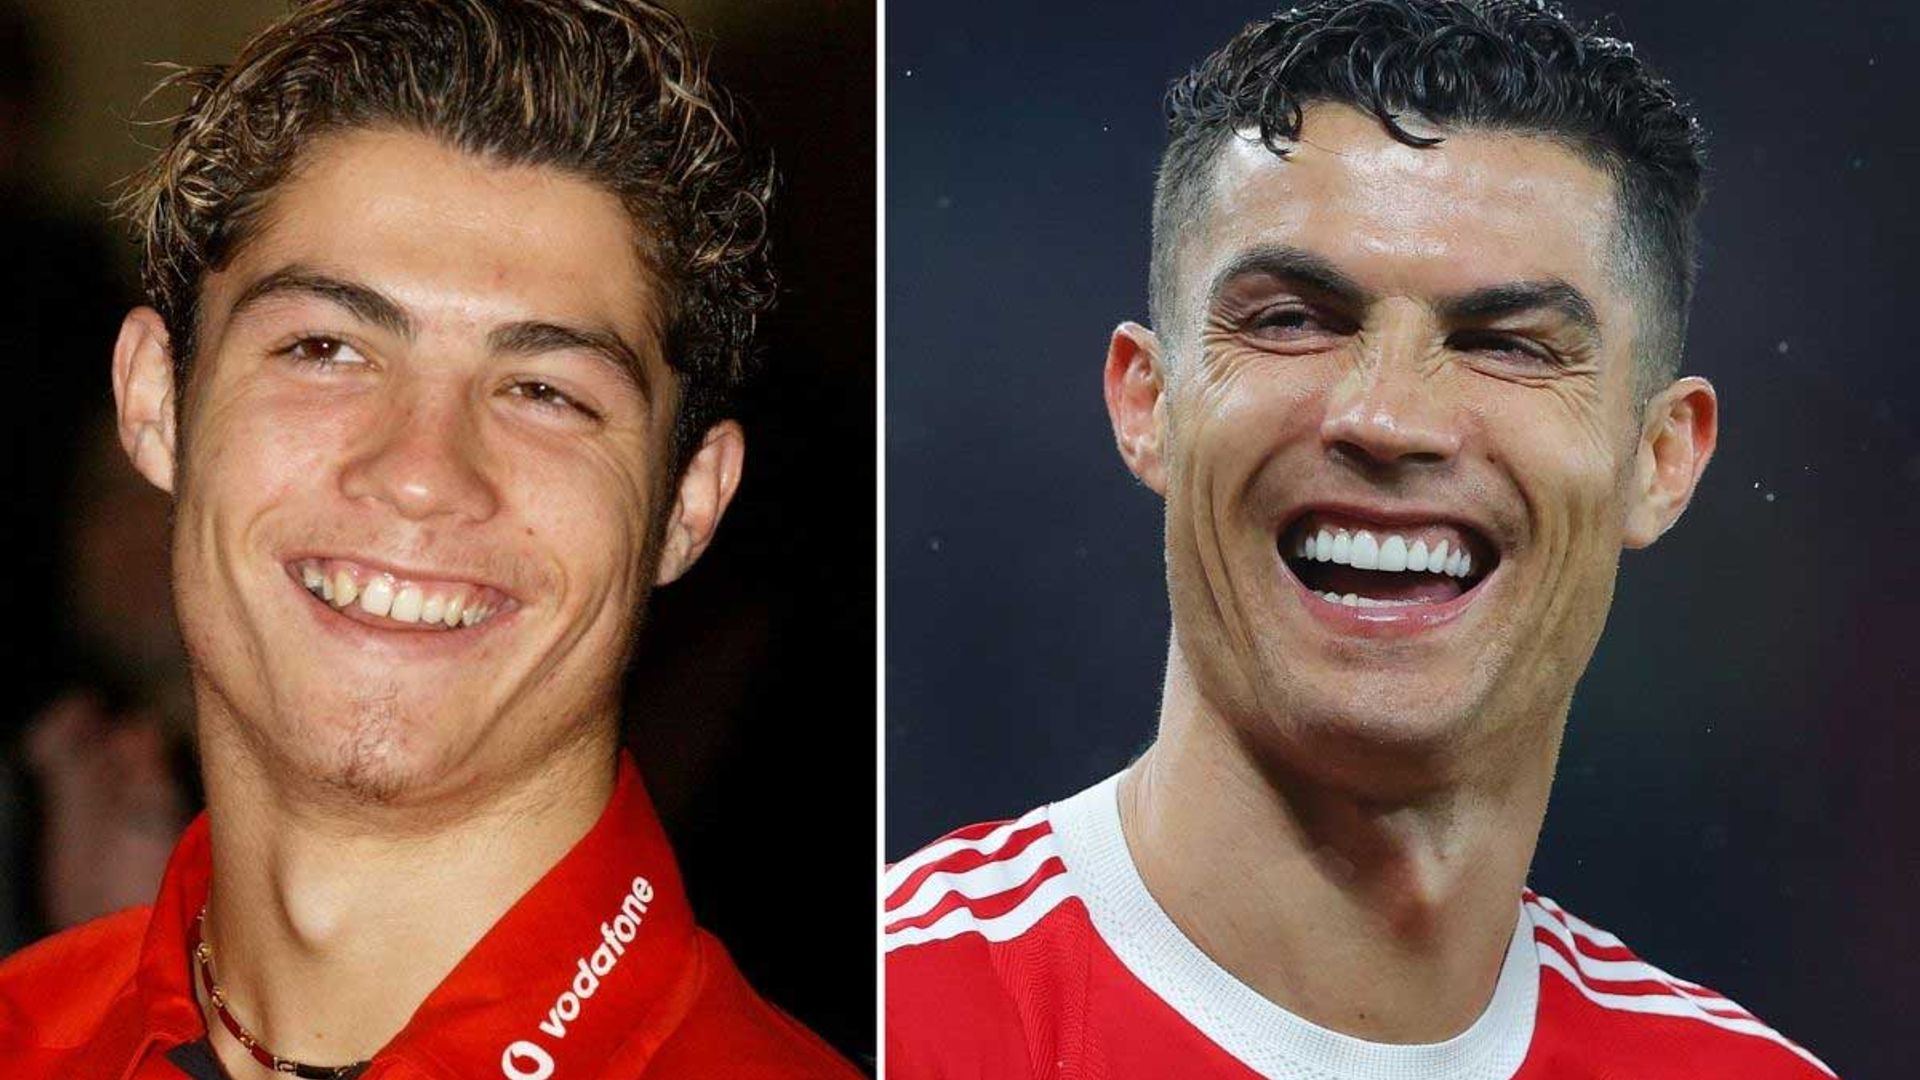 Cristiano Ronaldo smile transformation before and after: What has the footballer done to his teeth? | HELLO!